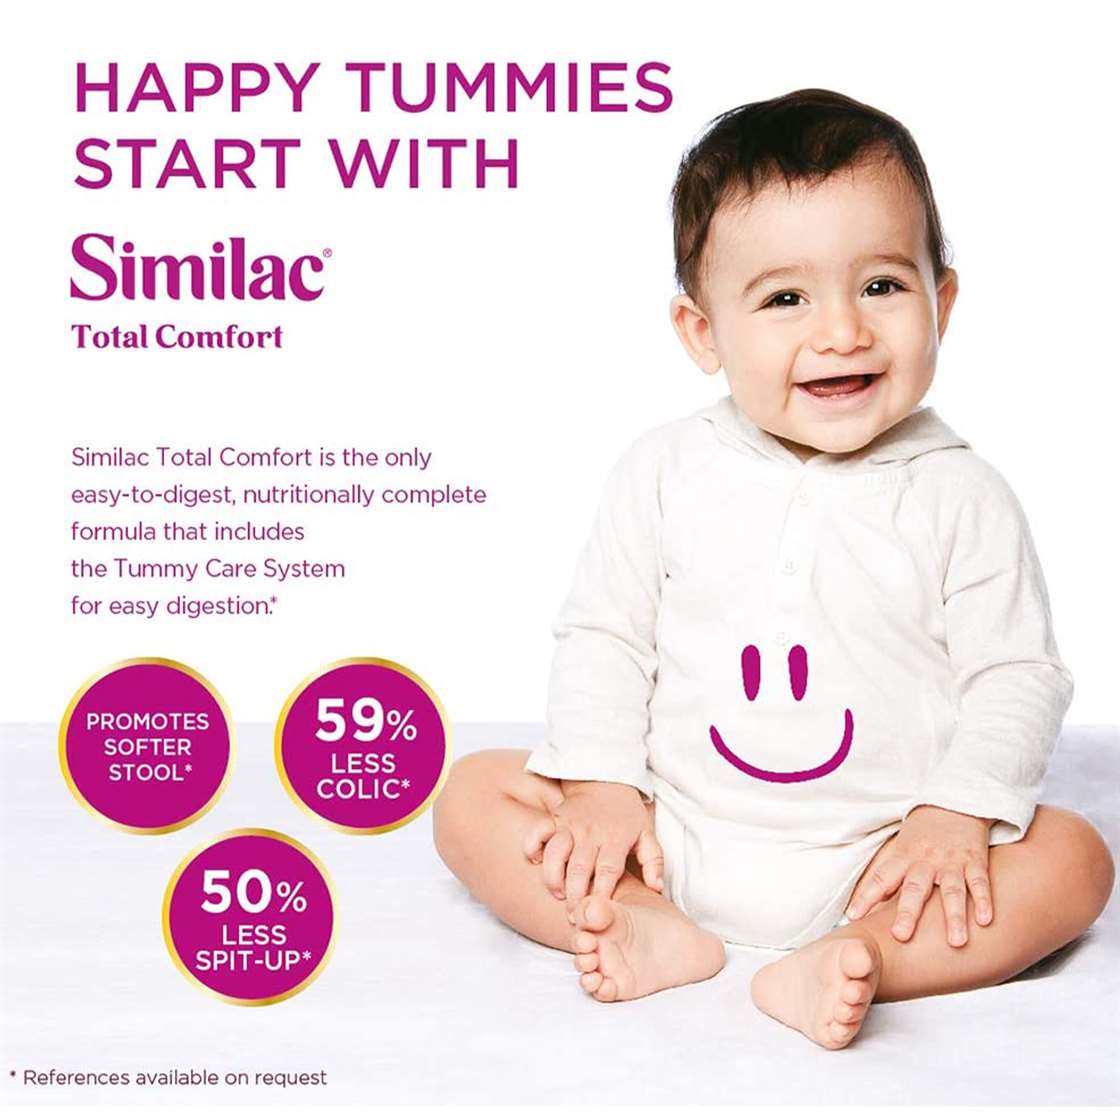 Abbott Similac Total Comfort Infant Formula - 350g,  Stage-2, From 6 to 12 Months (Imported)